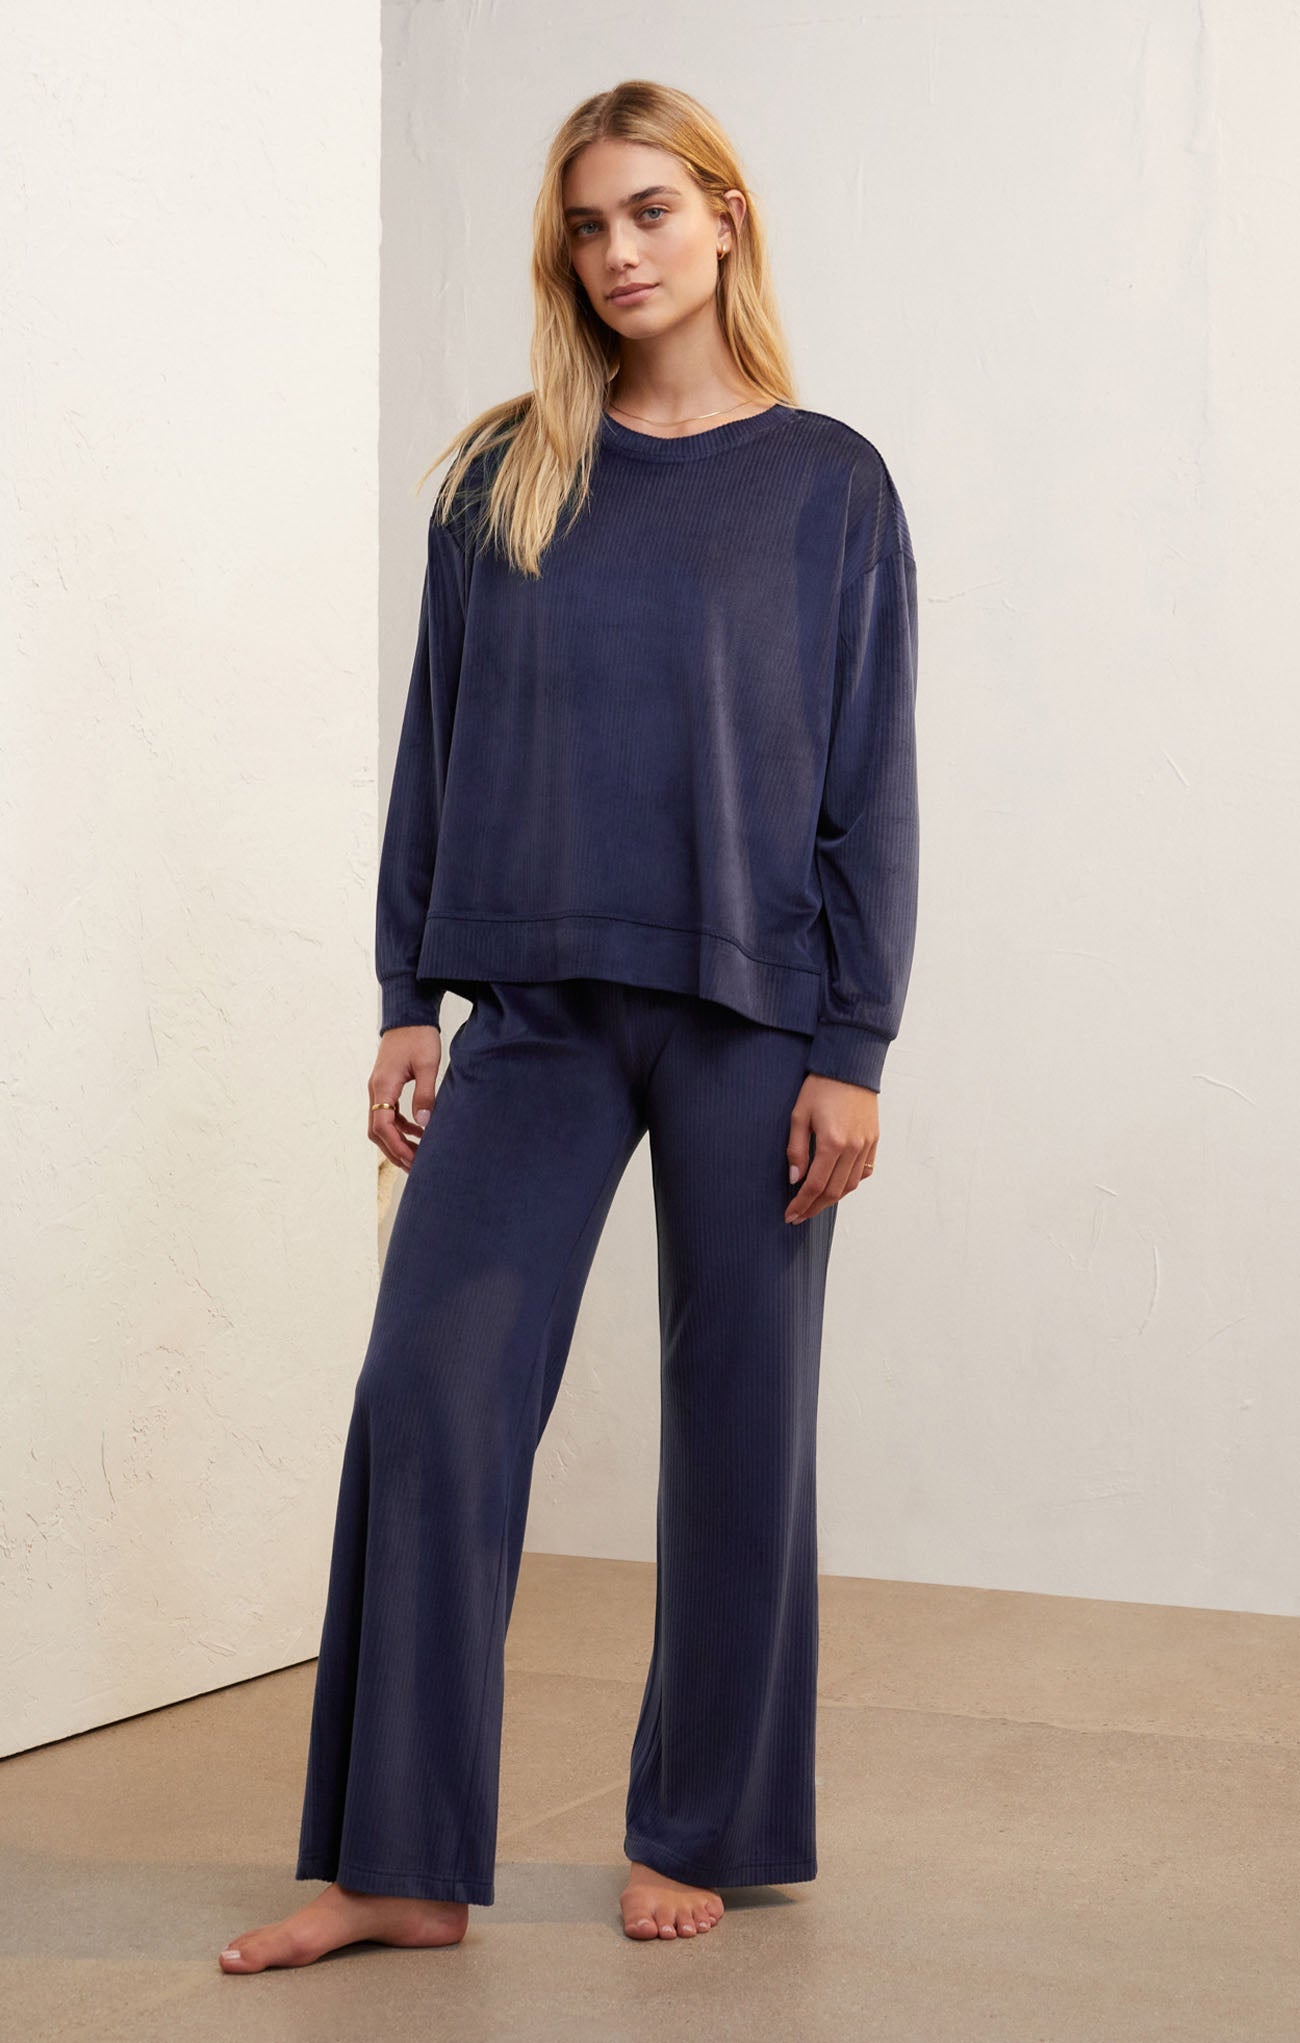 Flare Up Velour Pant in Deep Blue